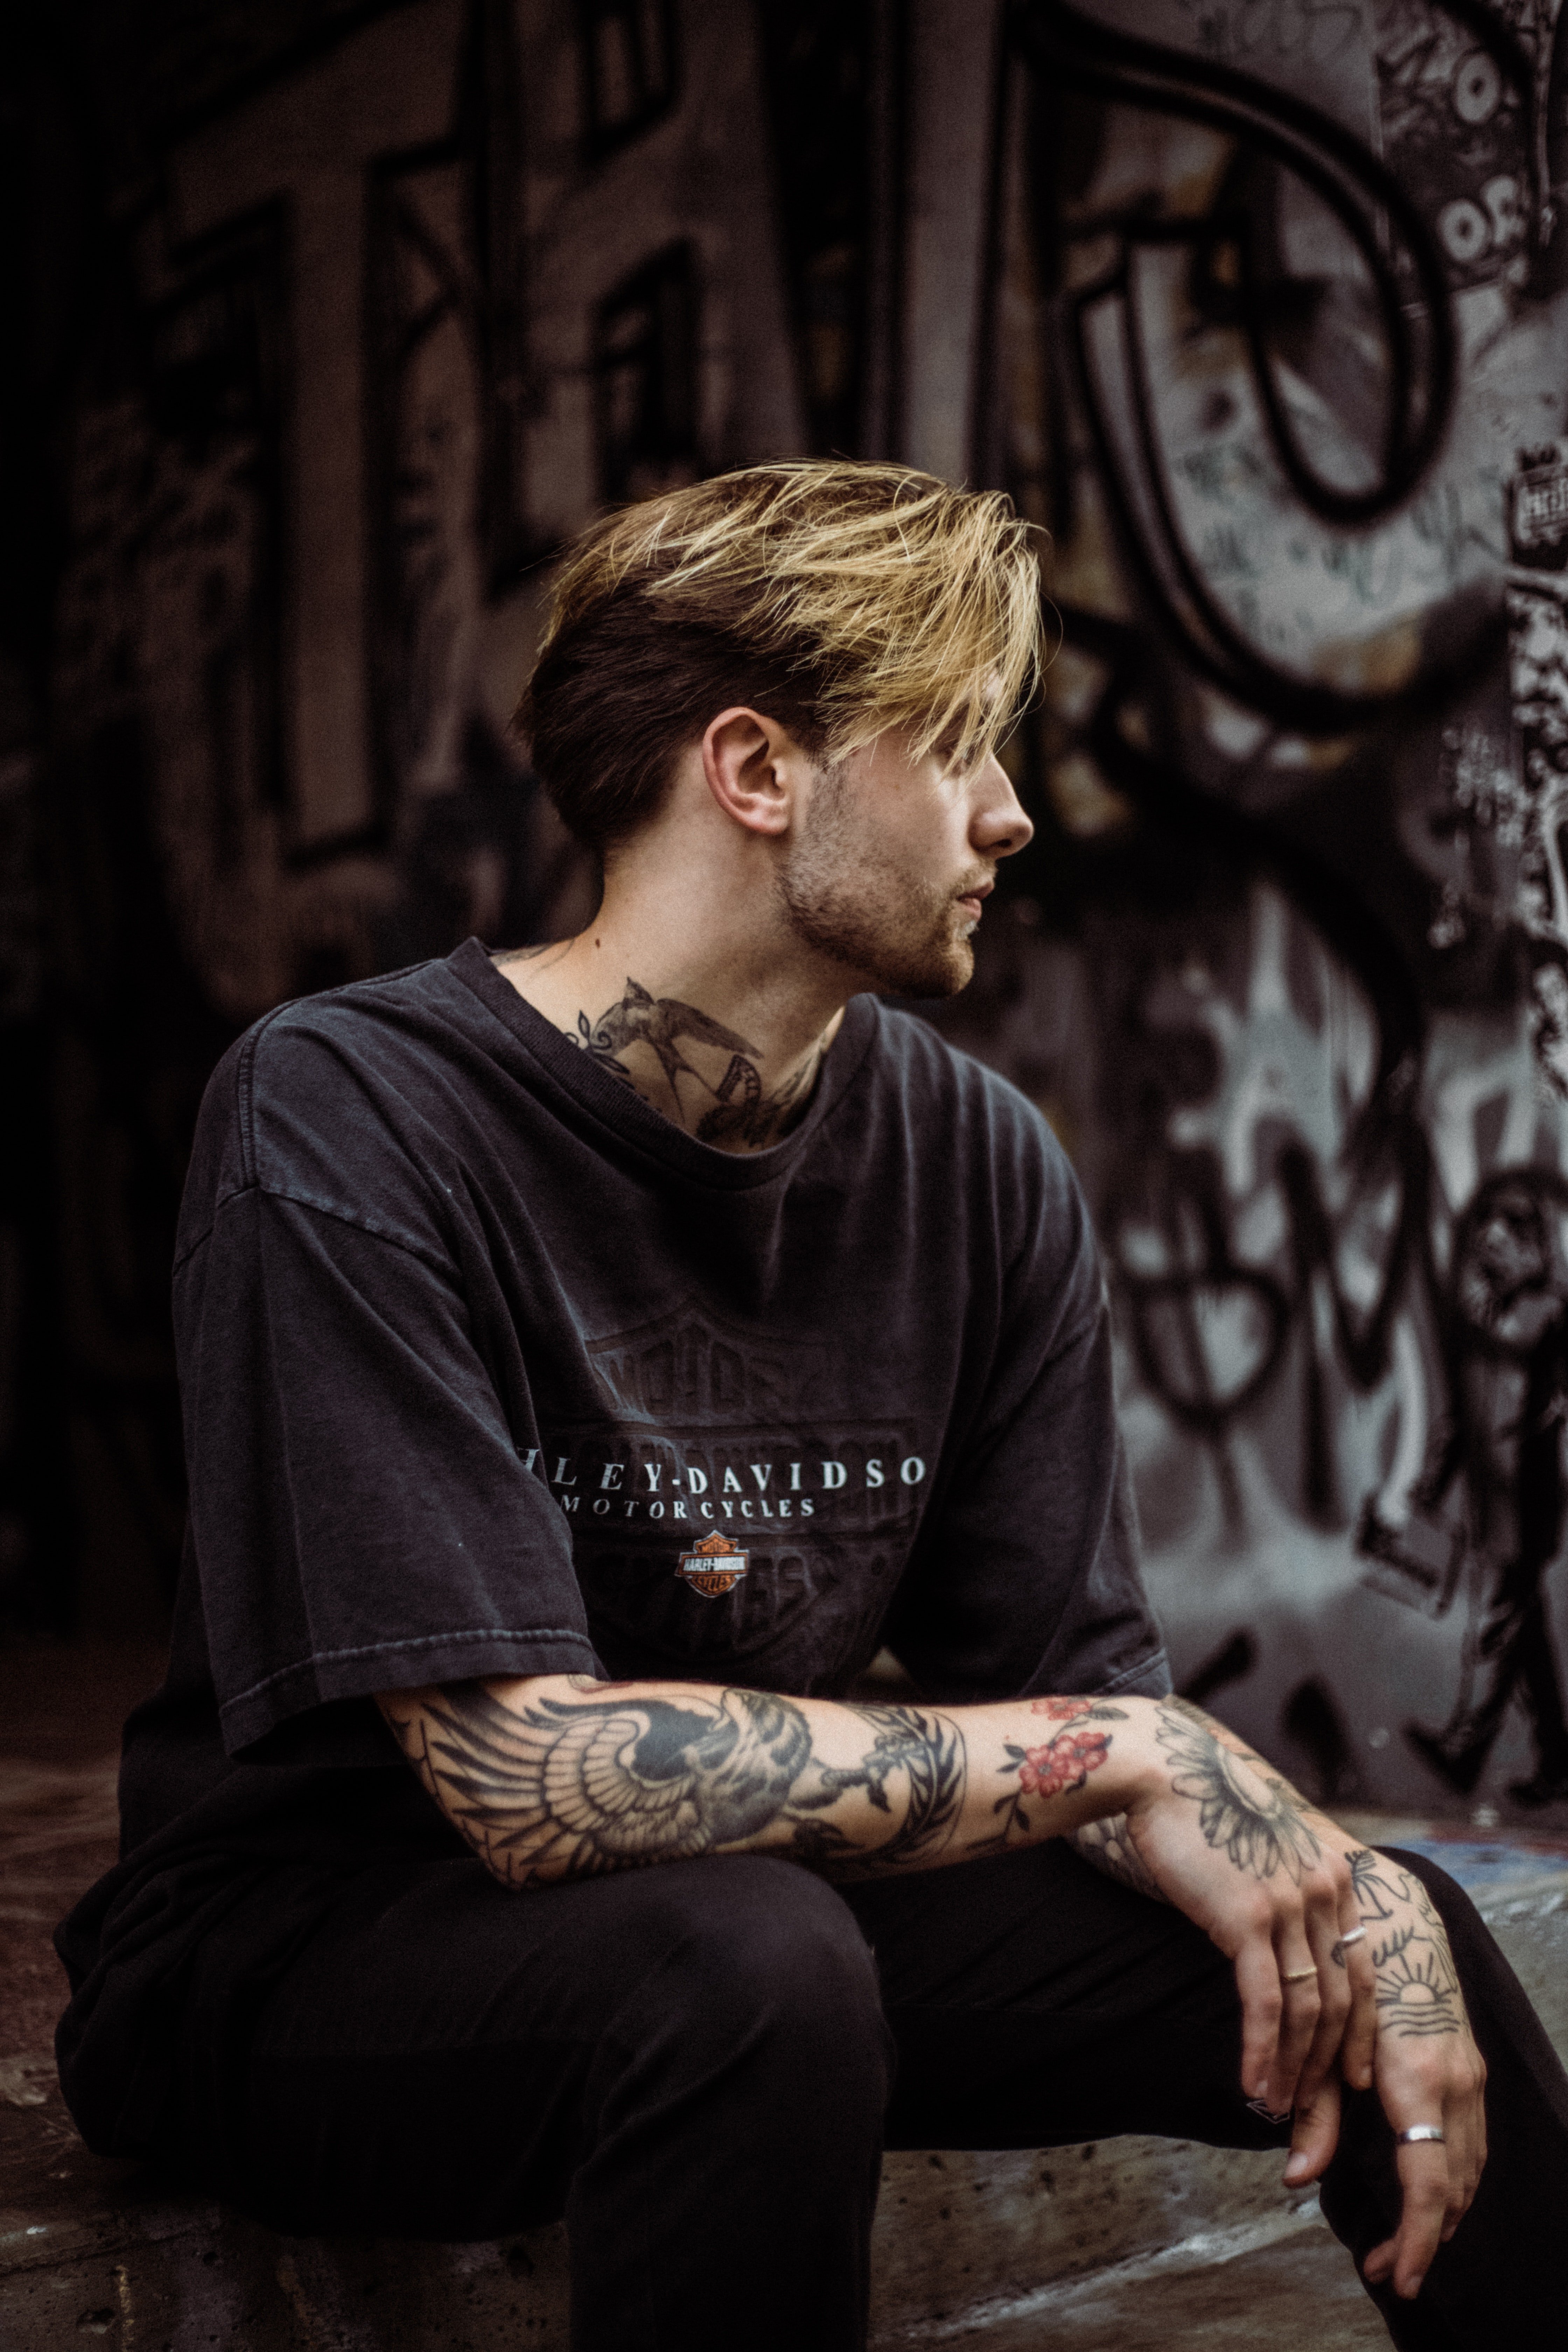 Man with tattoos on his arms sitting. | Source: Pexels/ Ralph Rabago